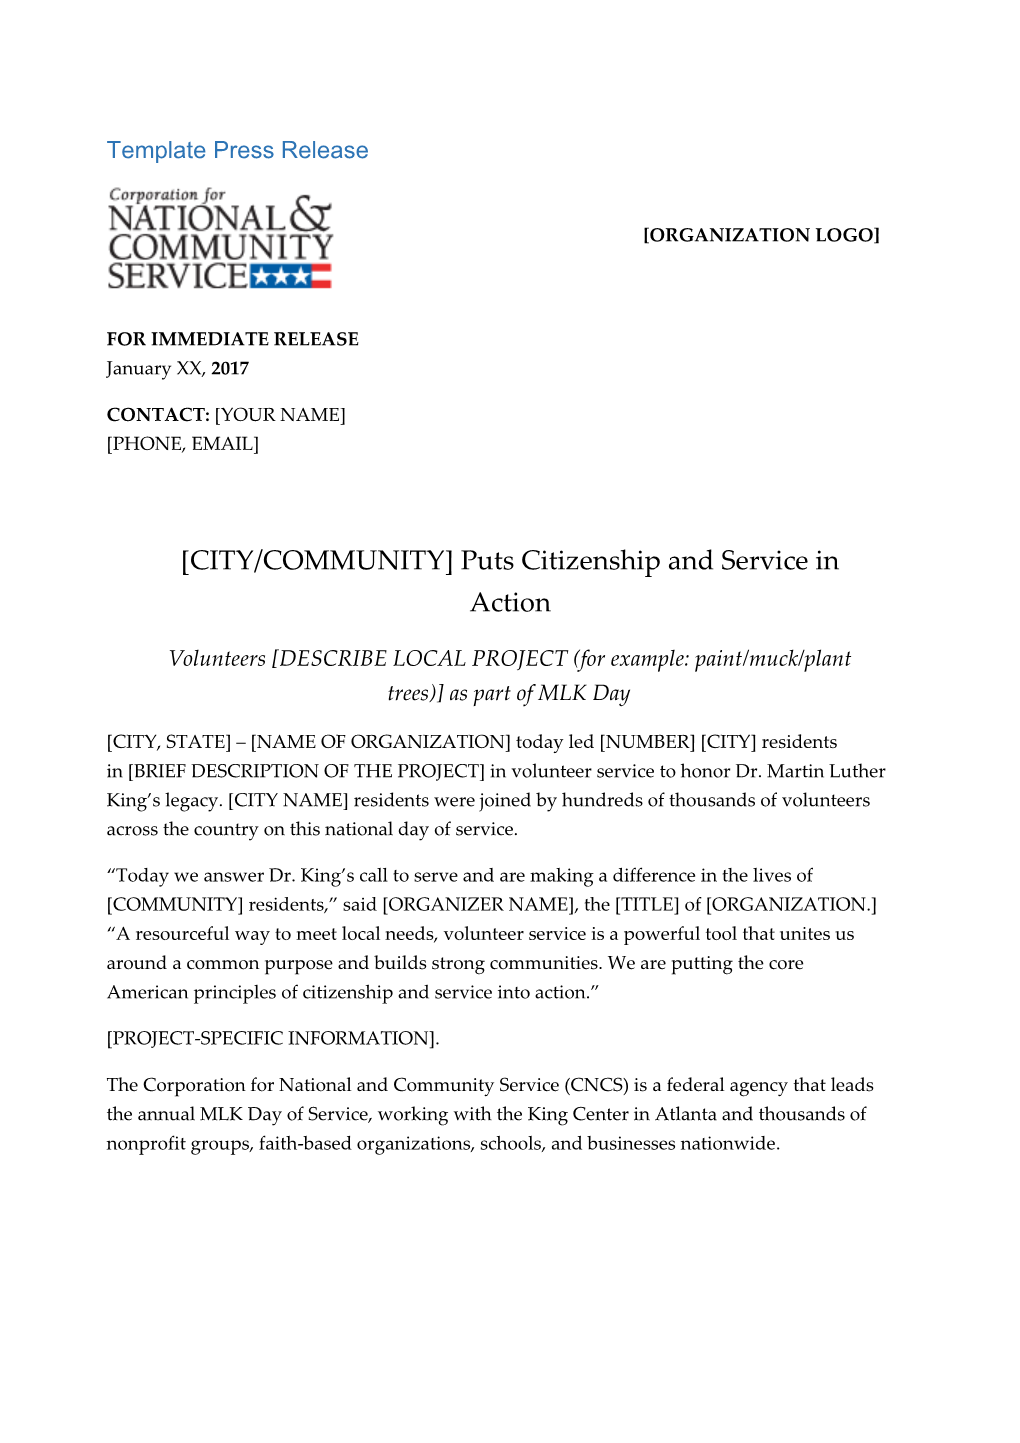 2016 MLK Day of Service Sample Press Release